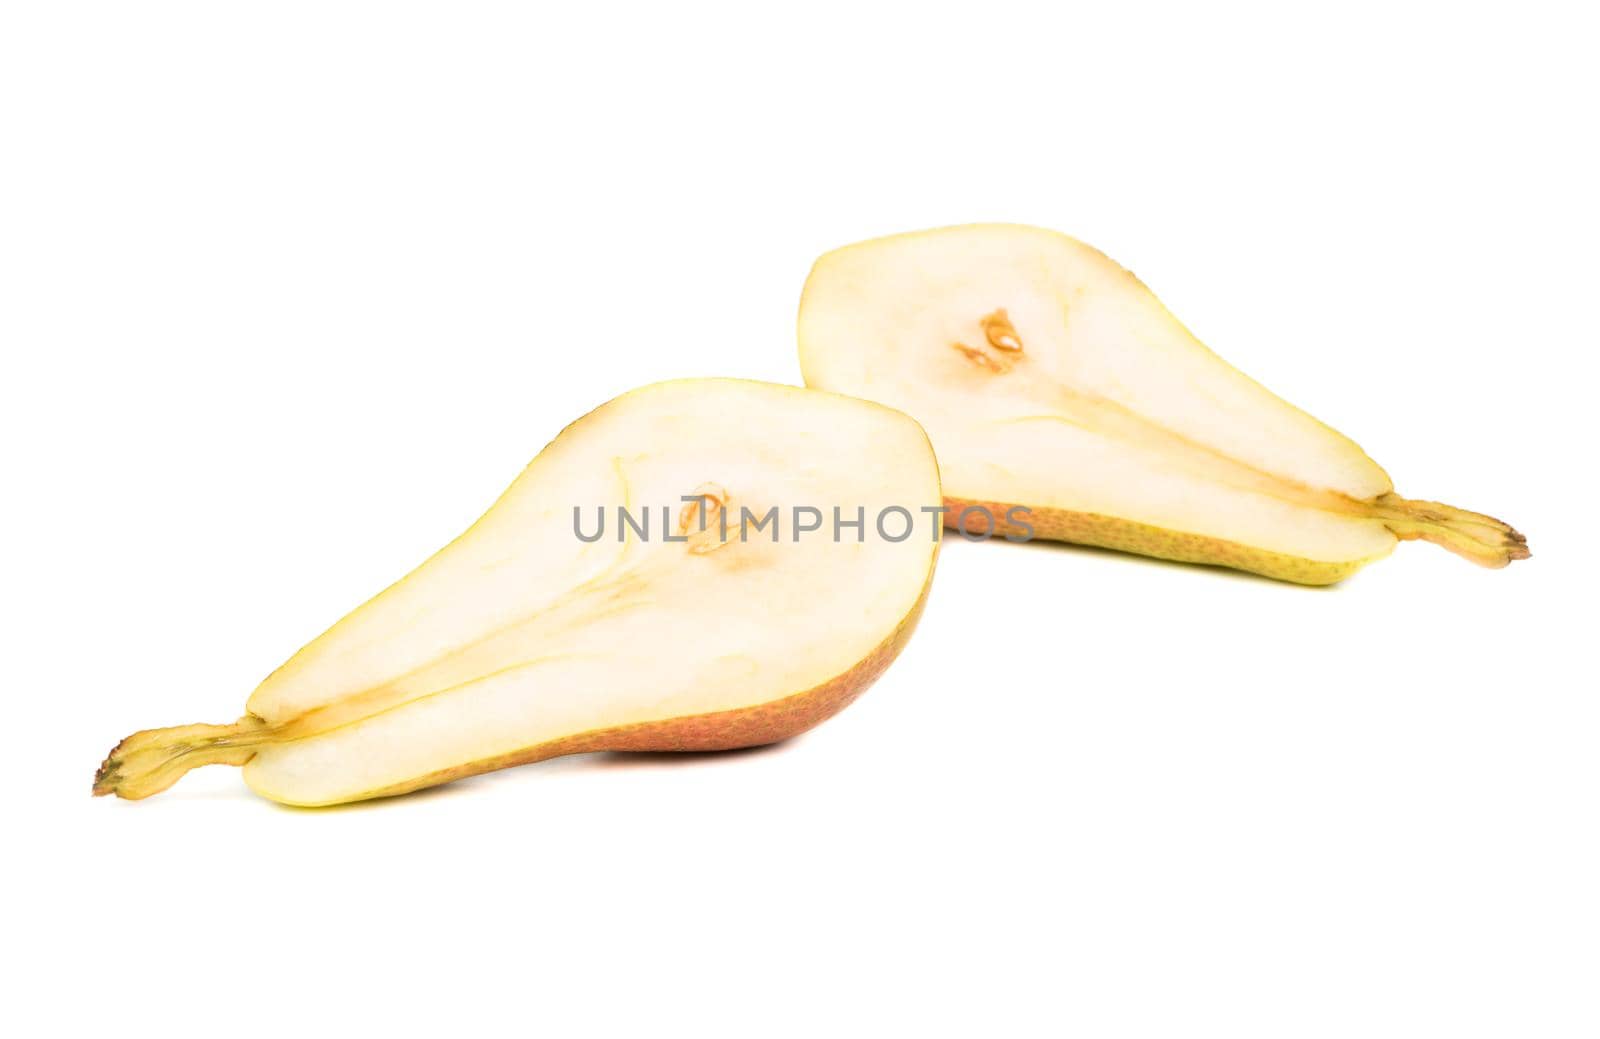 Two halves of fresh pear on white background